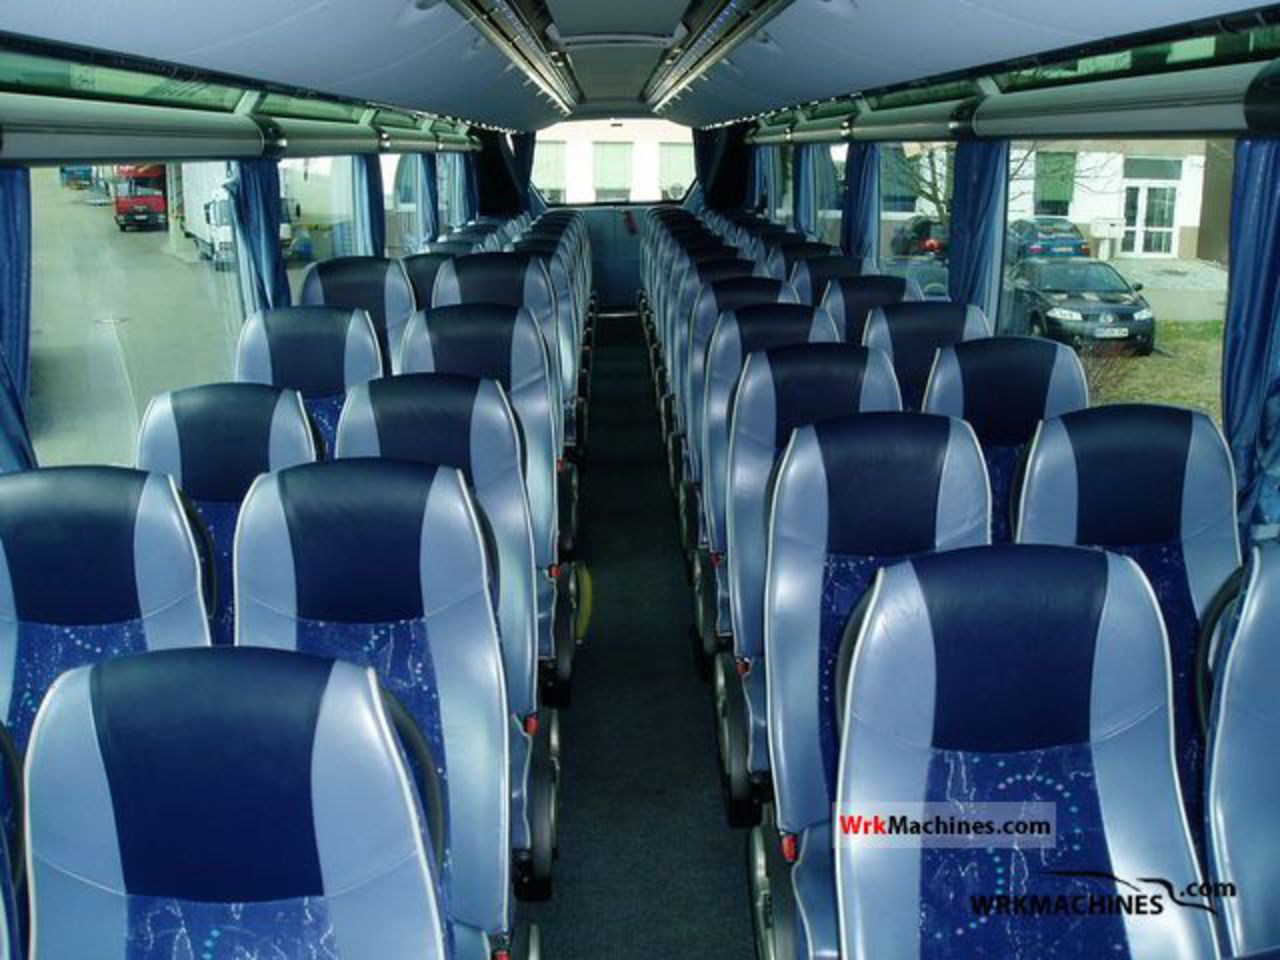 Neoplan N1163 Photo Gallery: Photo #07 out of 11, Image Size - 500 ...